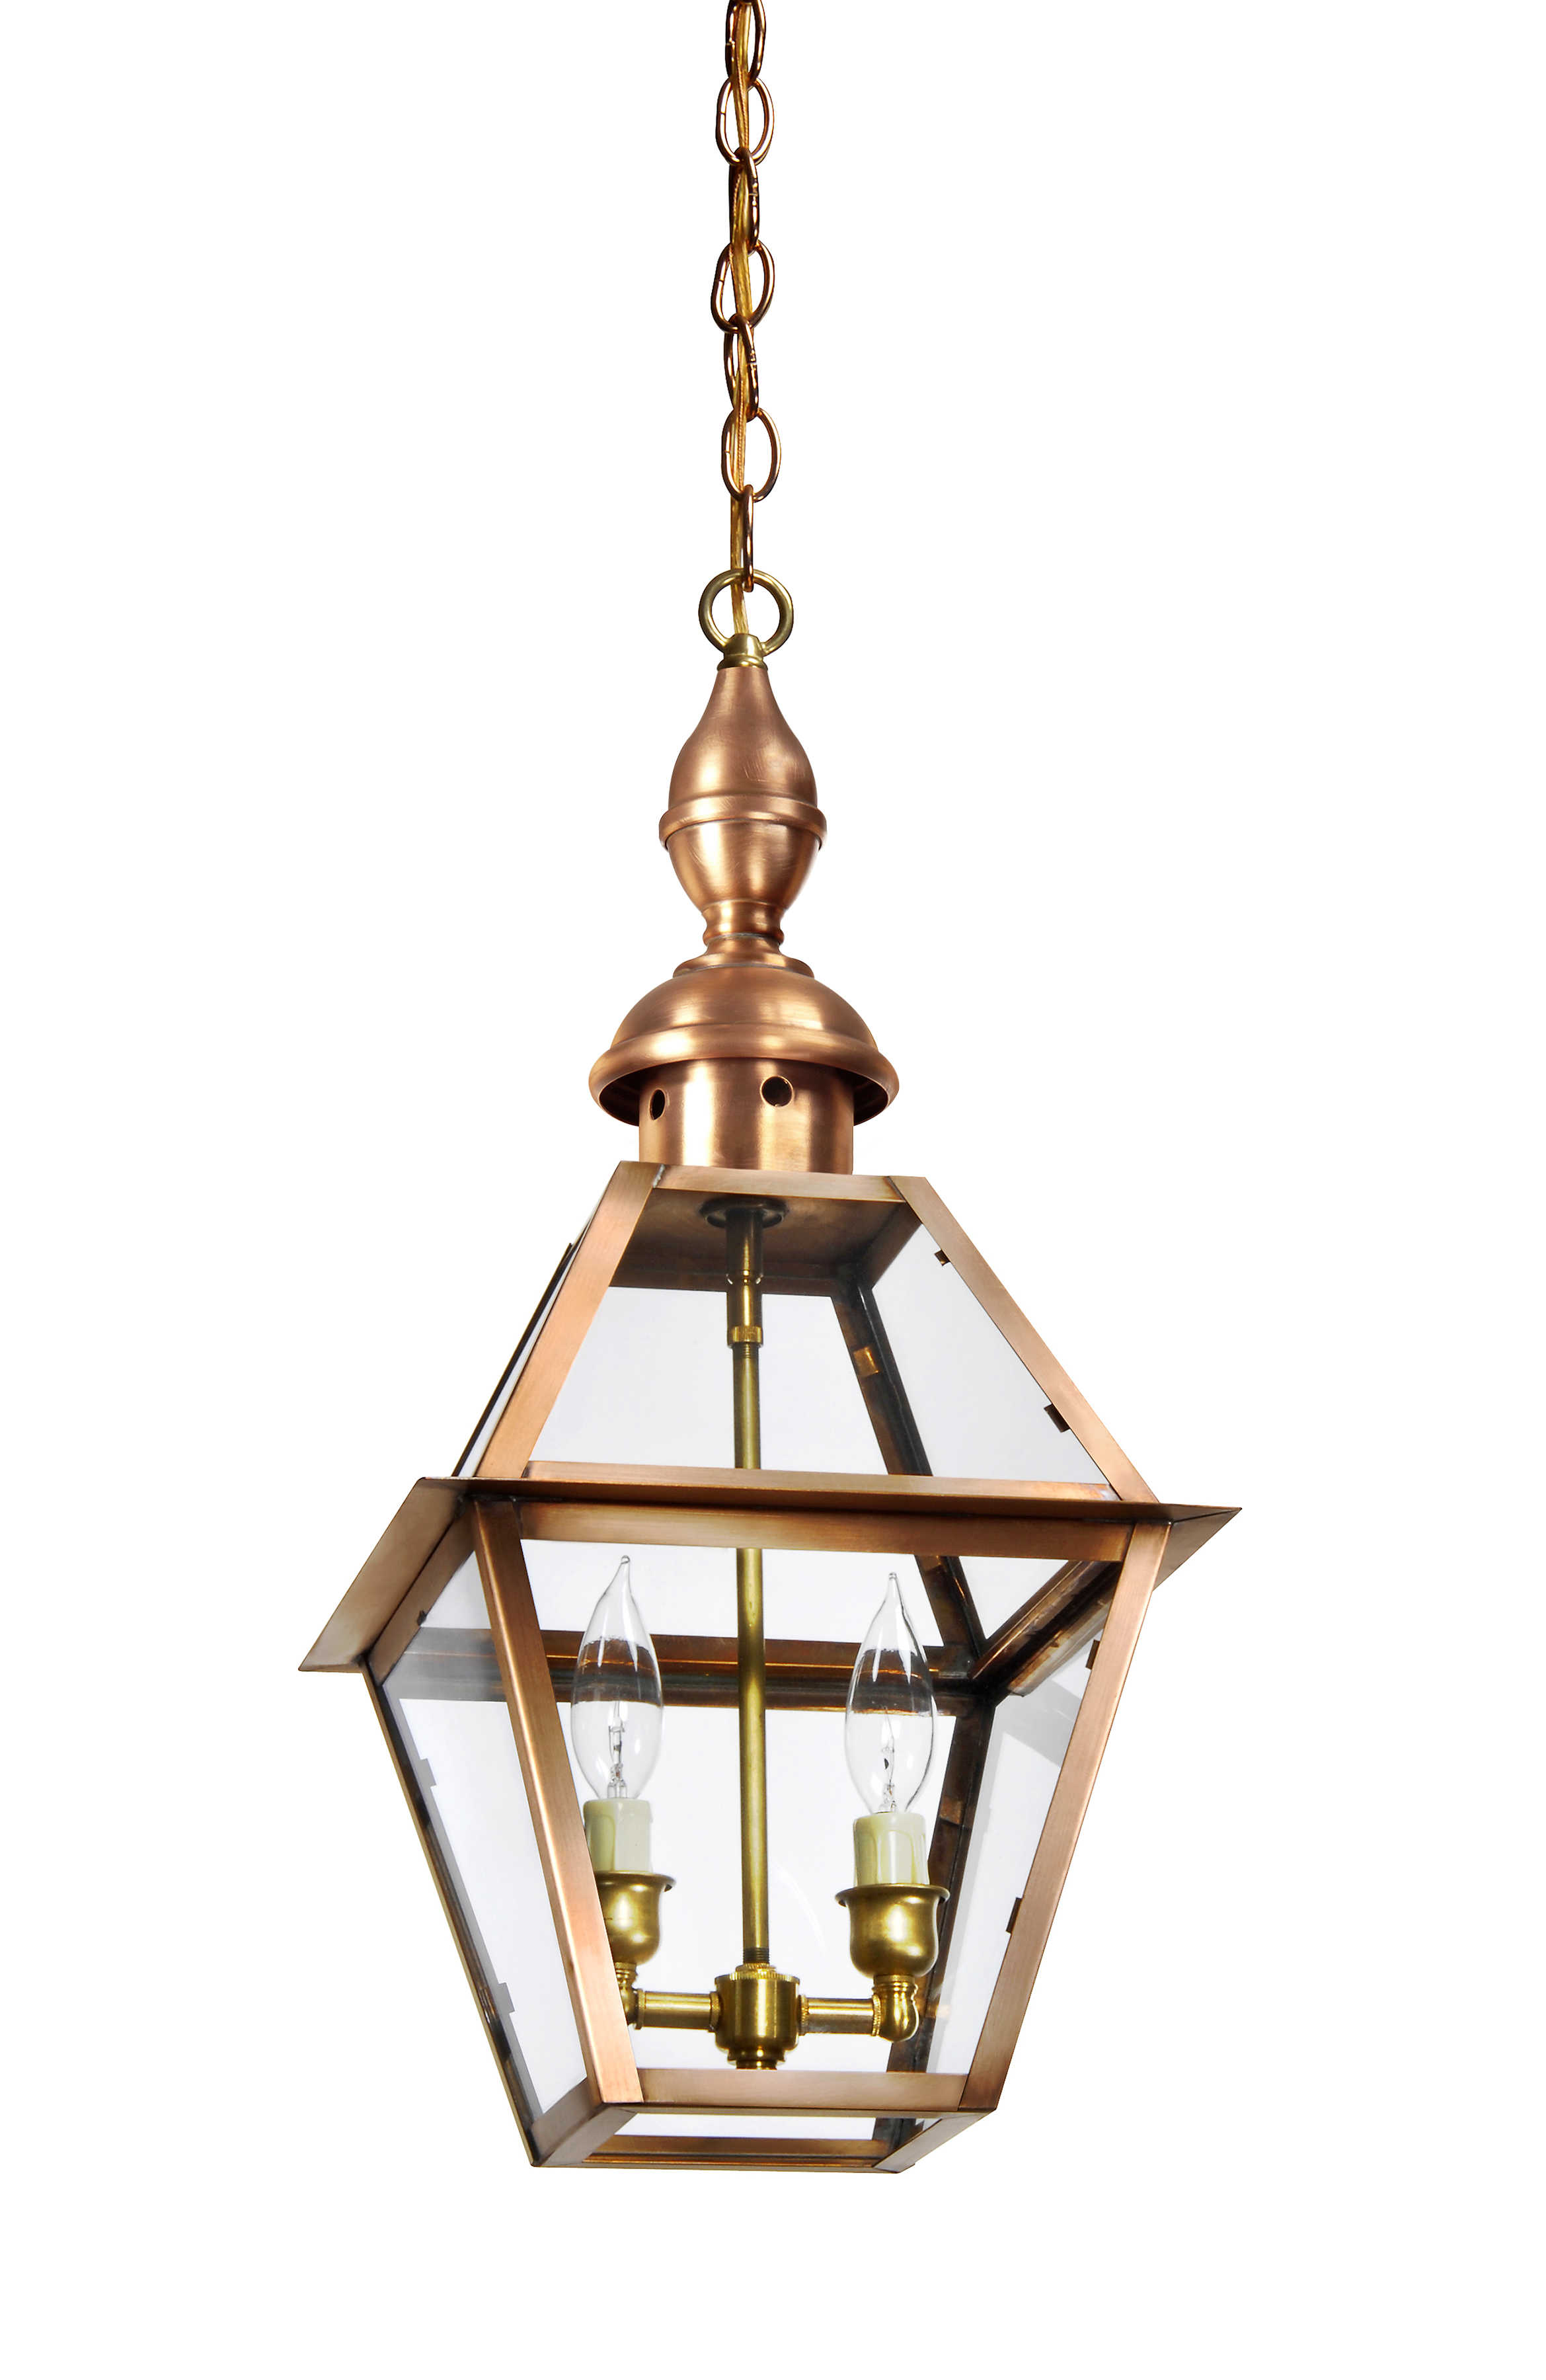 Vauxhall Collection CH-6V hanging bronze lantern hanging lantern copper lantern electric lantern traditional electric lantern traditional lantern traditional hanging light coastal lighting